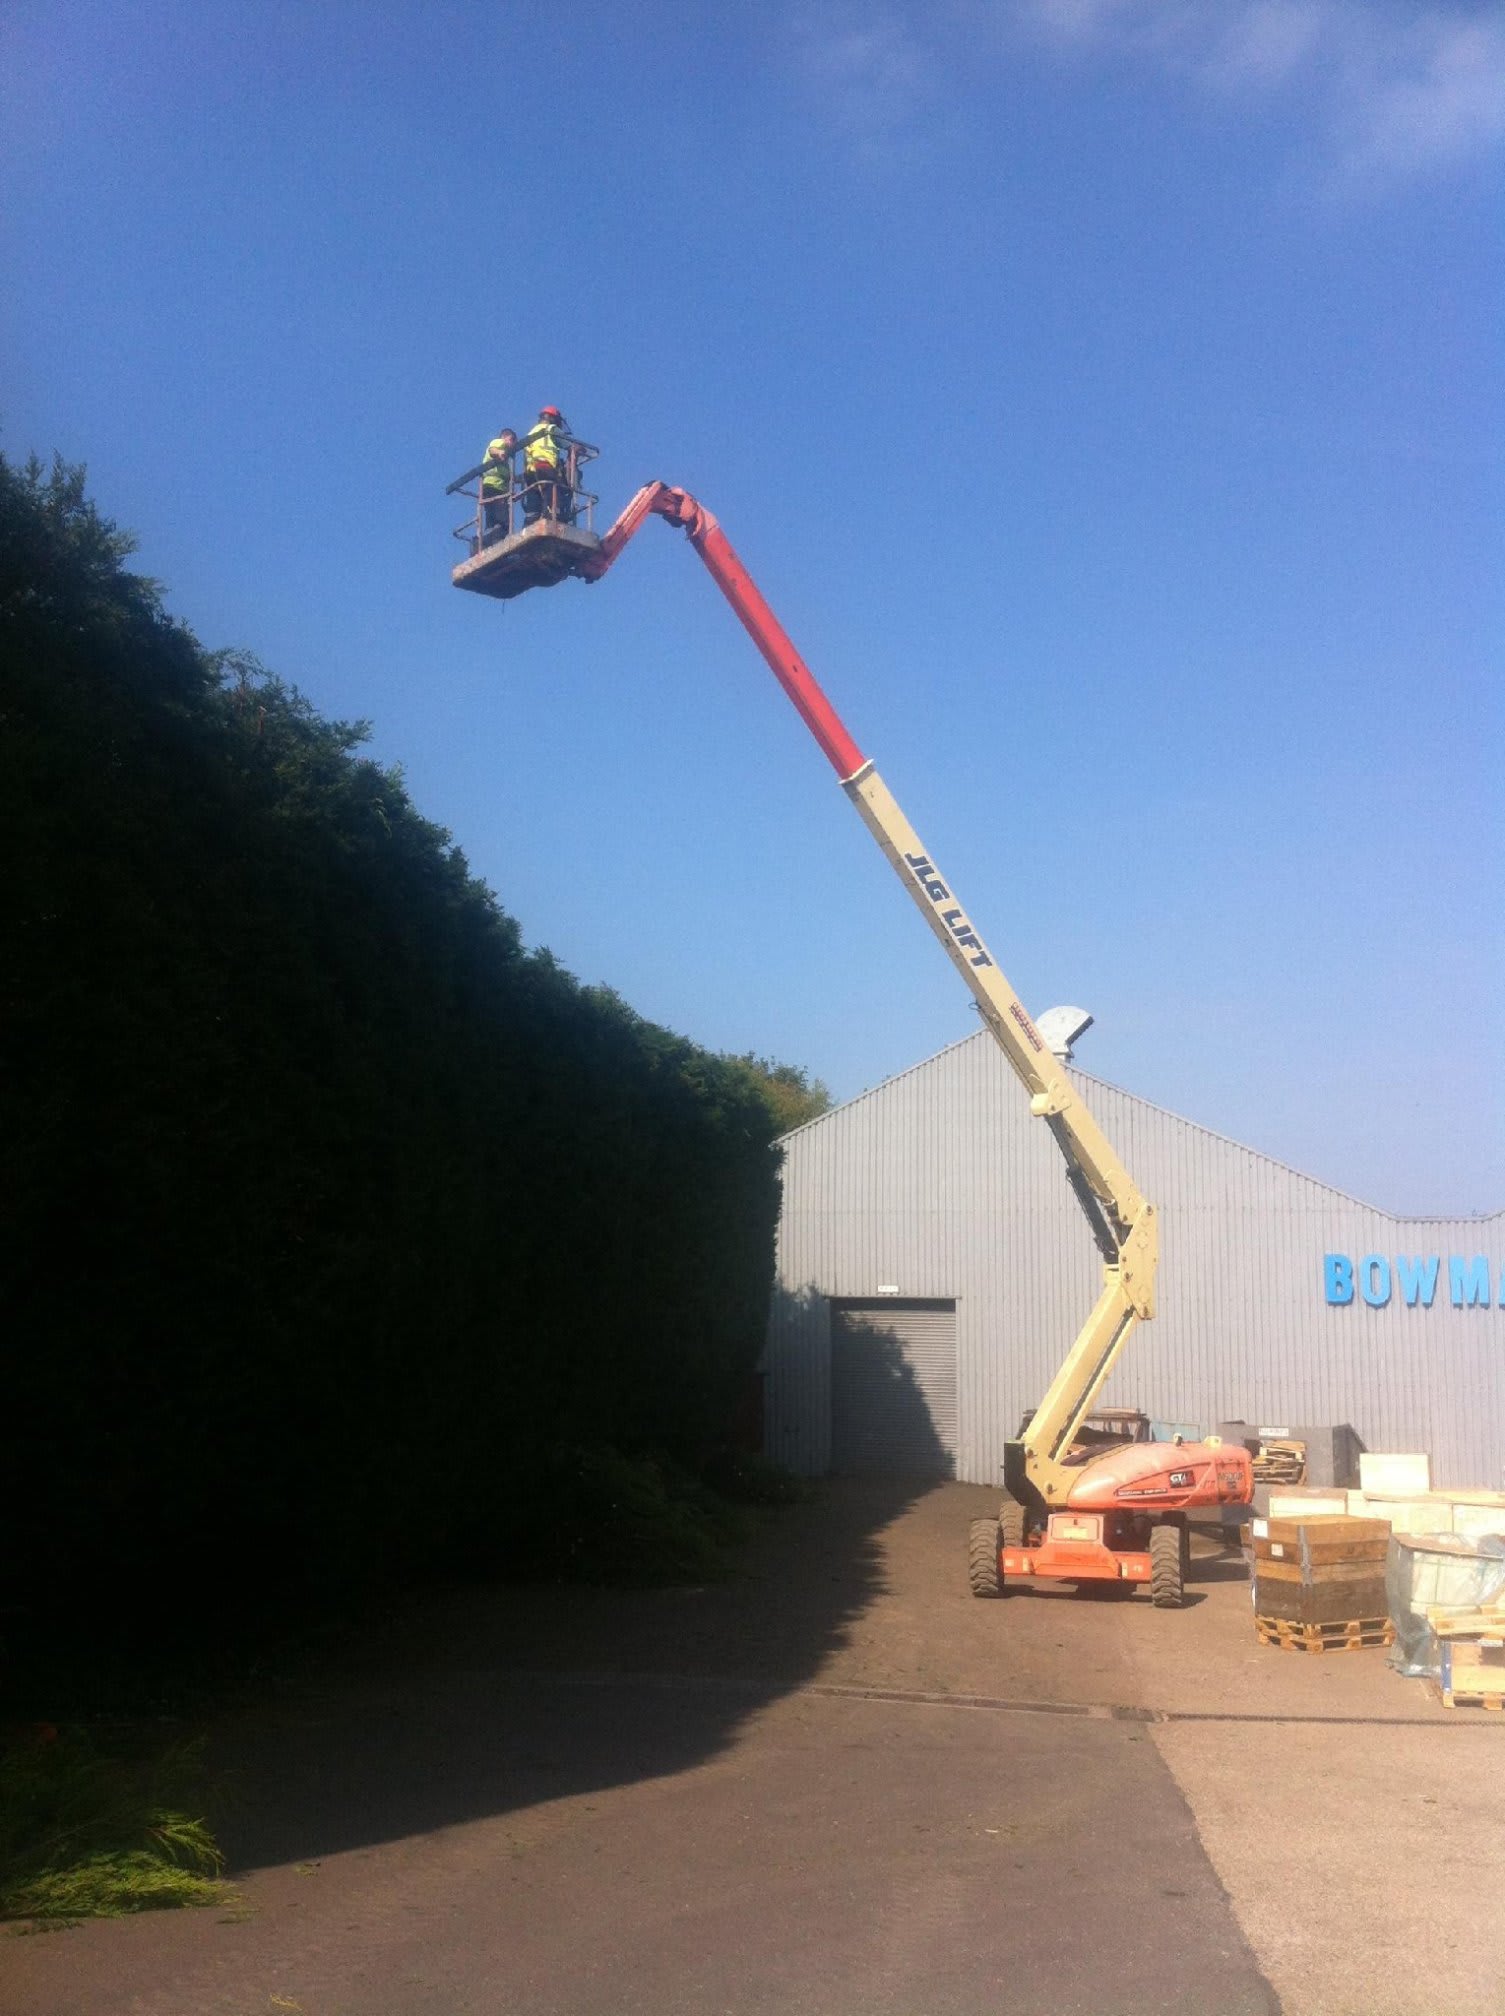 Images South Midland Tree Services Ltd